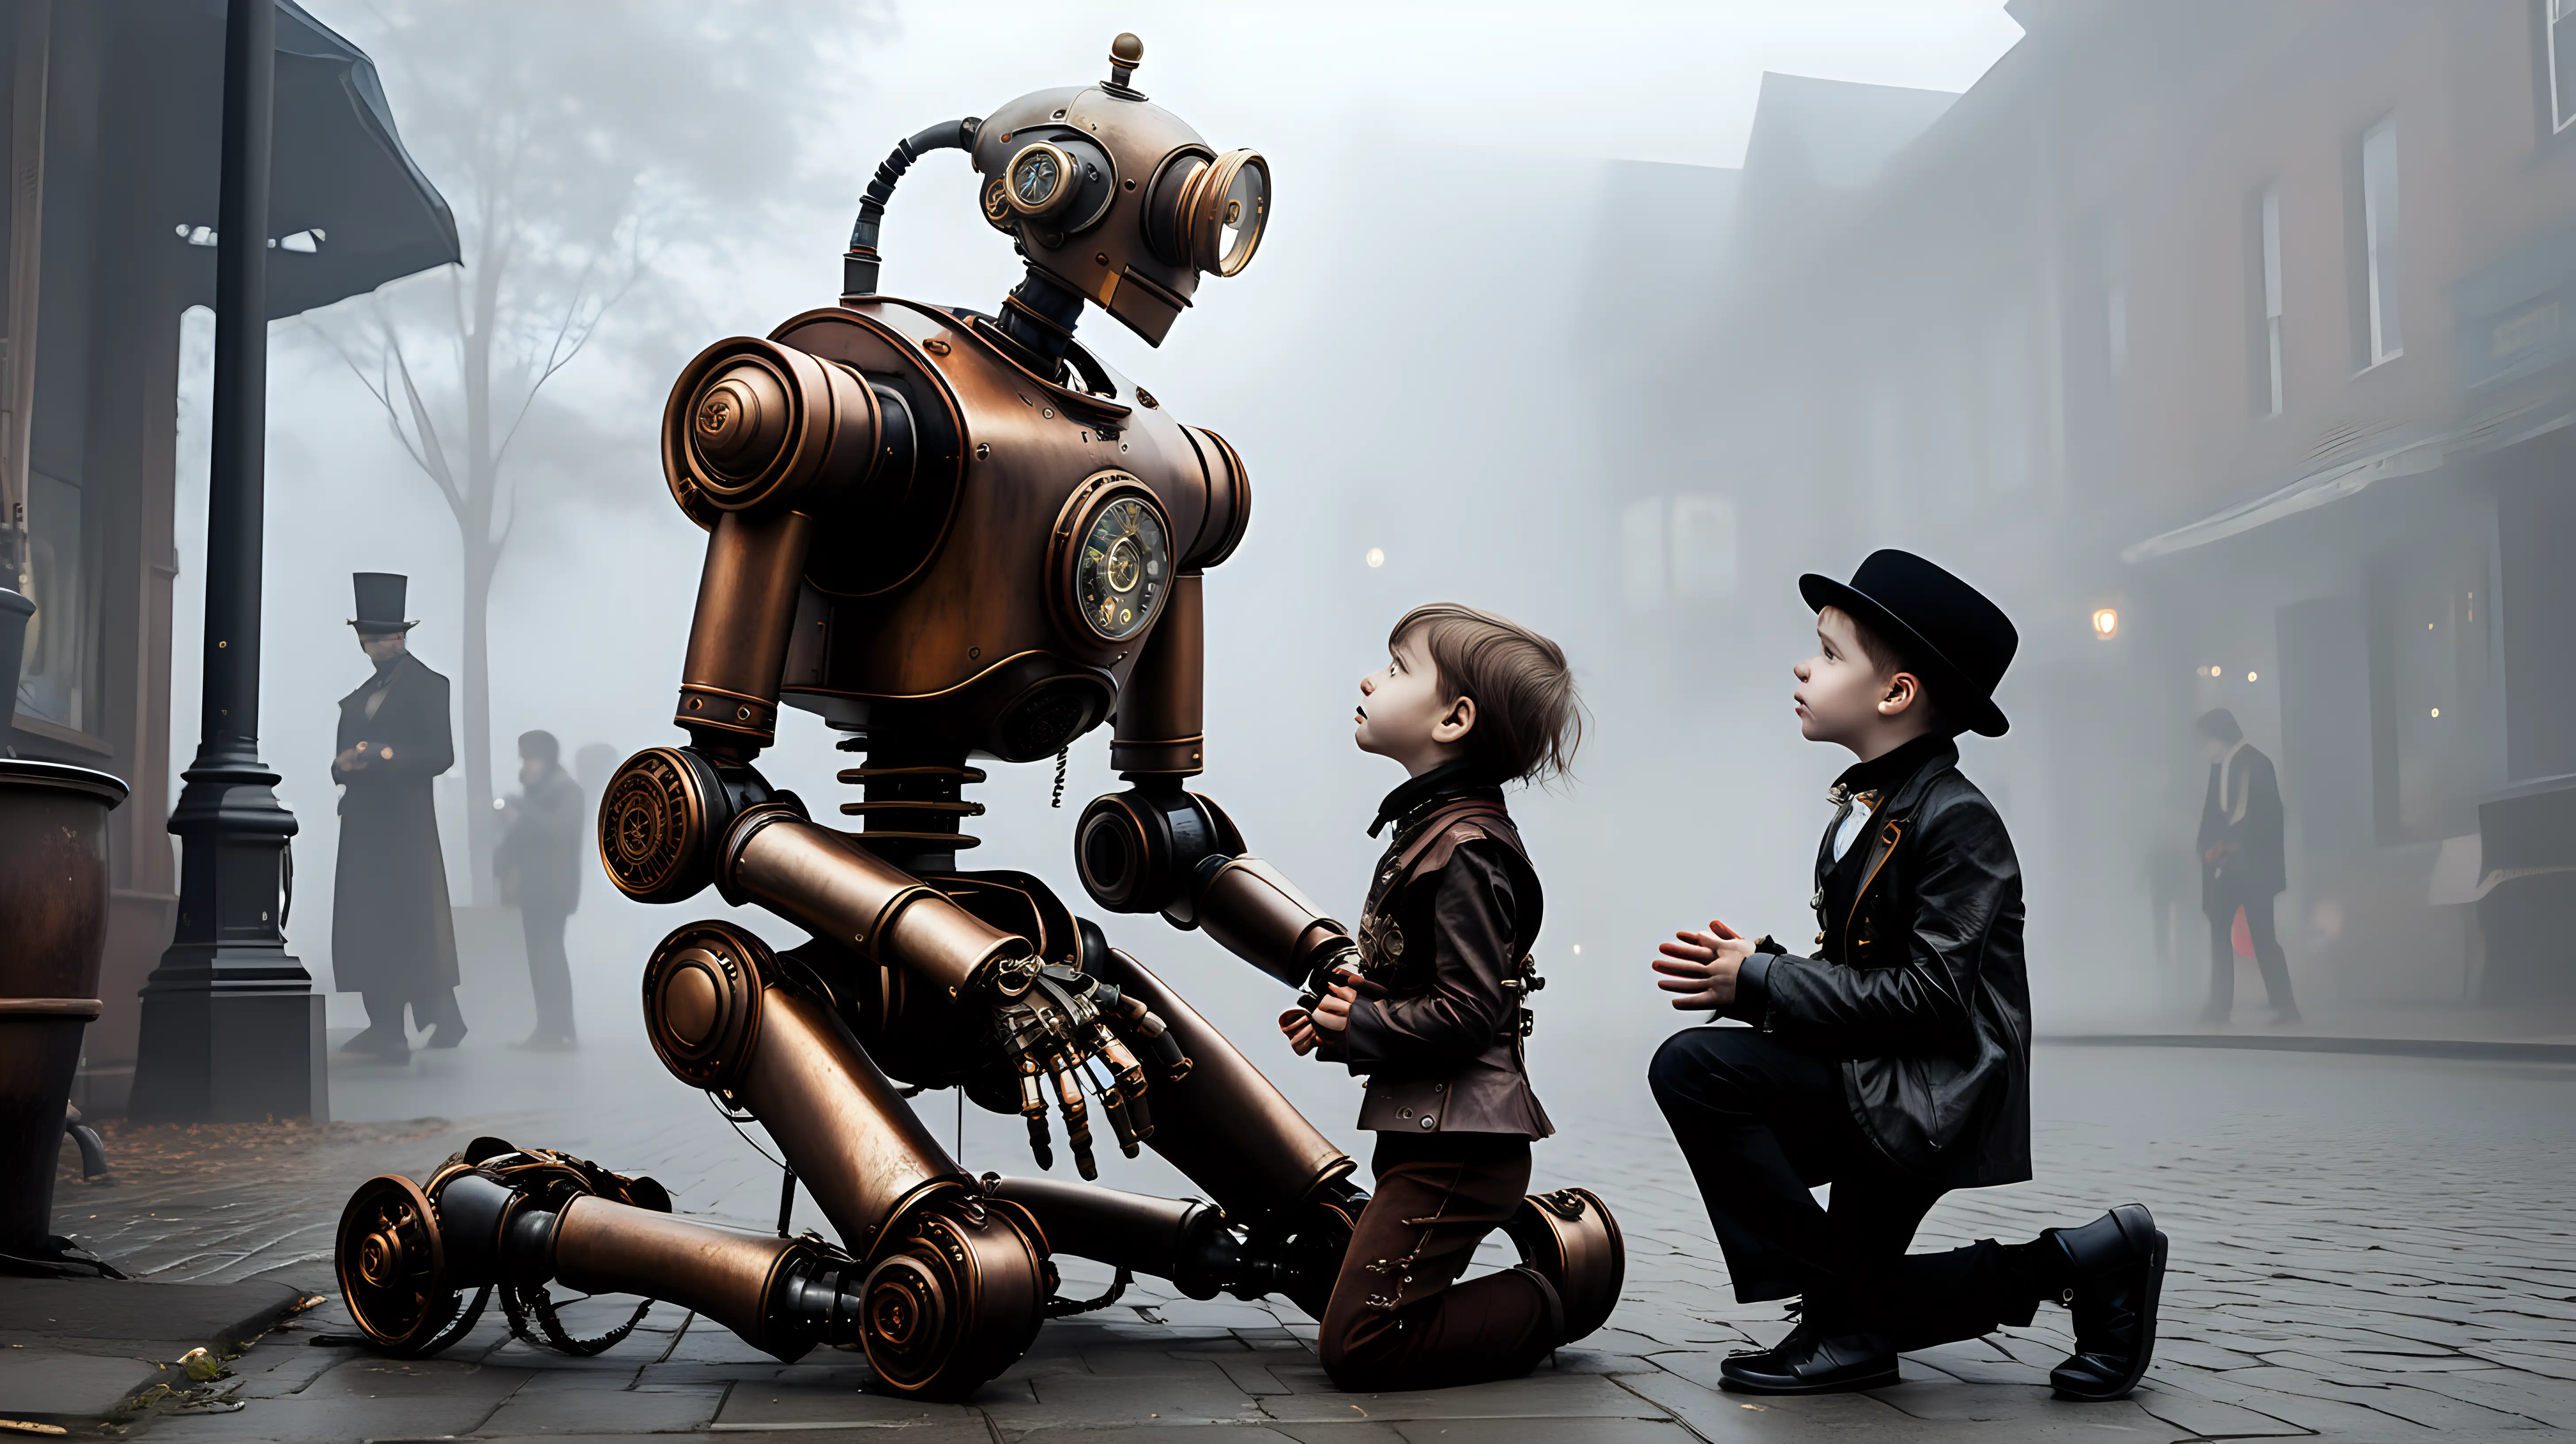 Steampunk Robot Engages in Heartwarming Conversation with Child in Enchanting Foggy Street